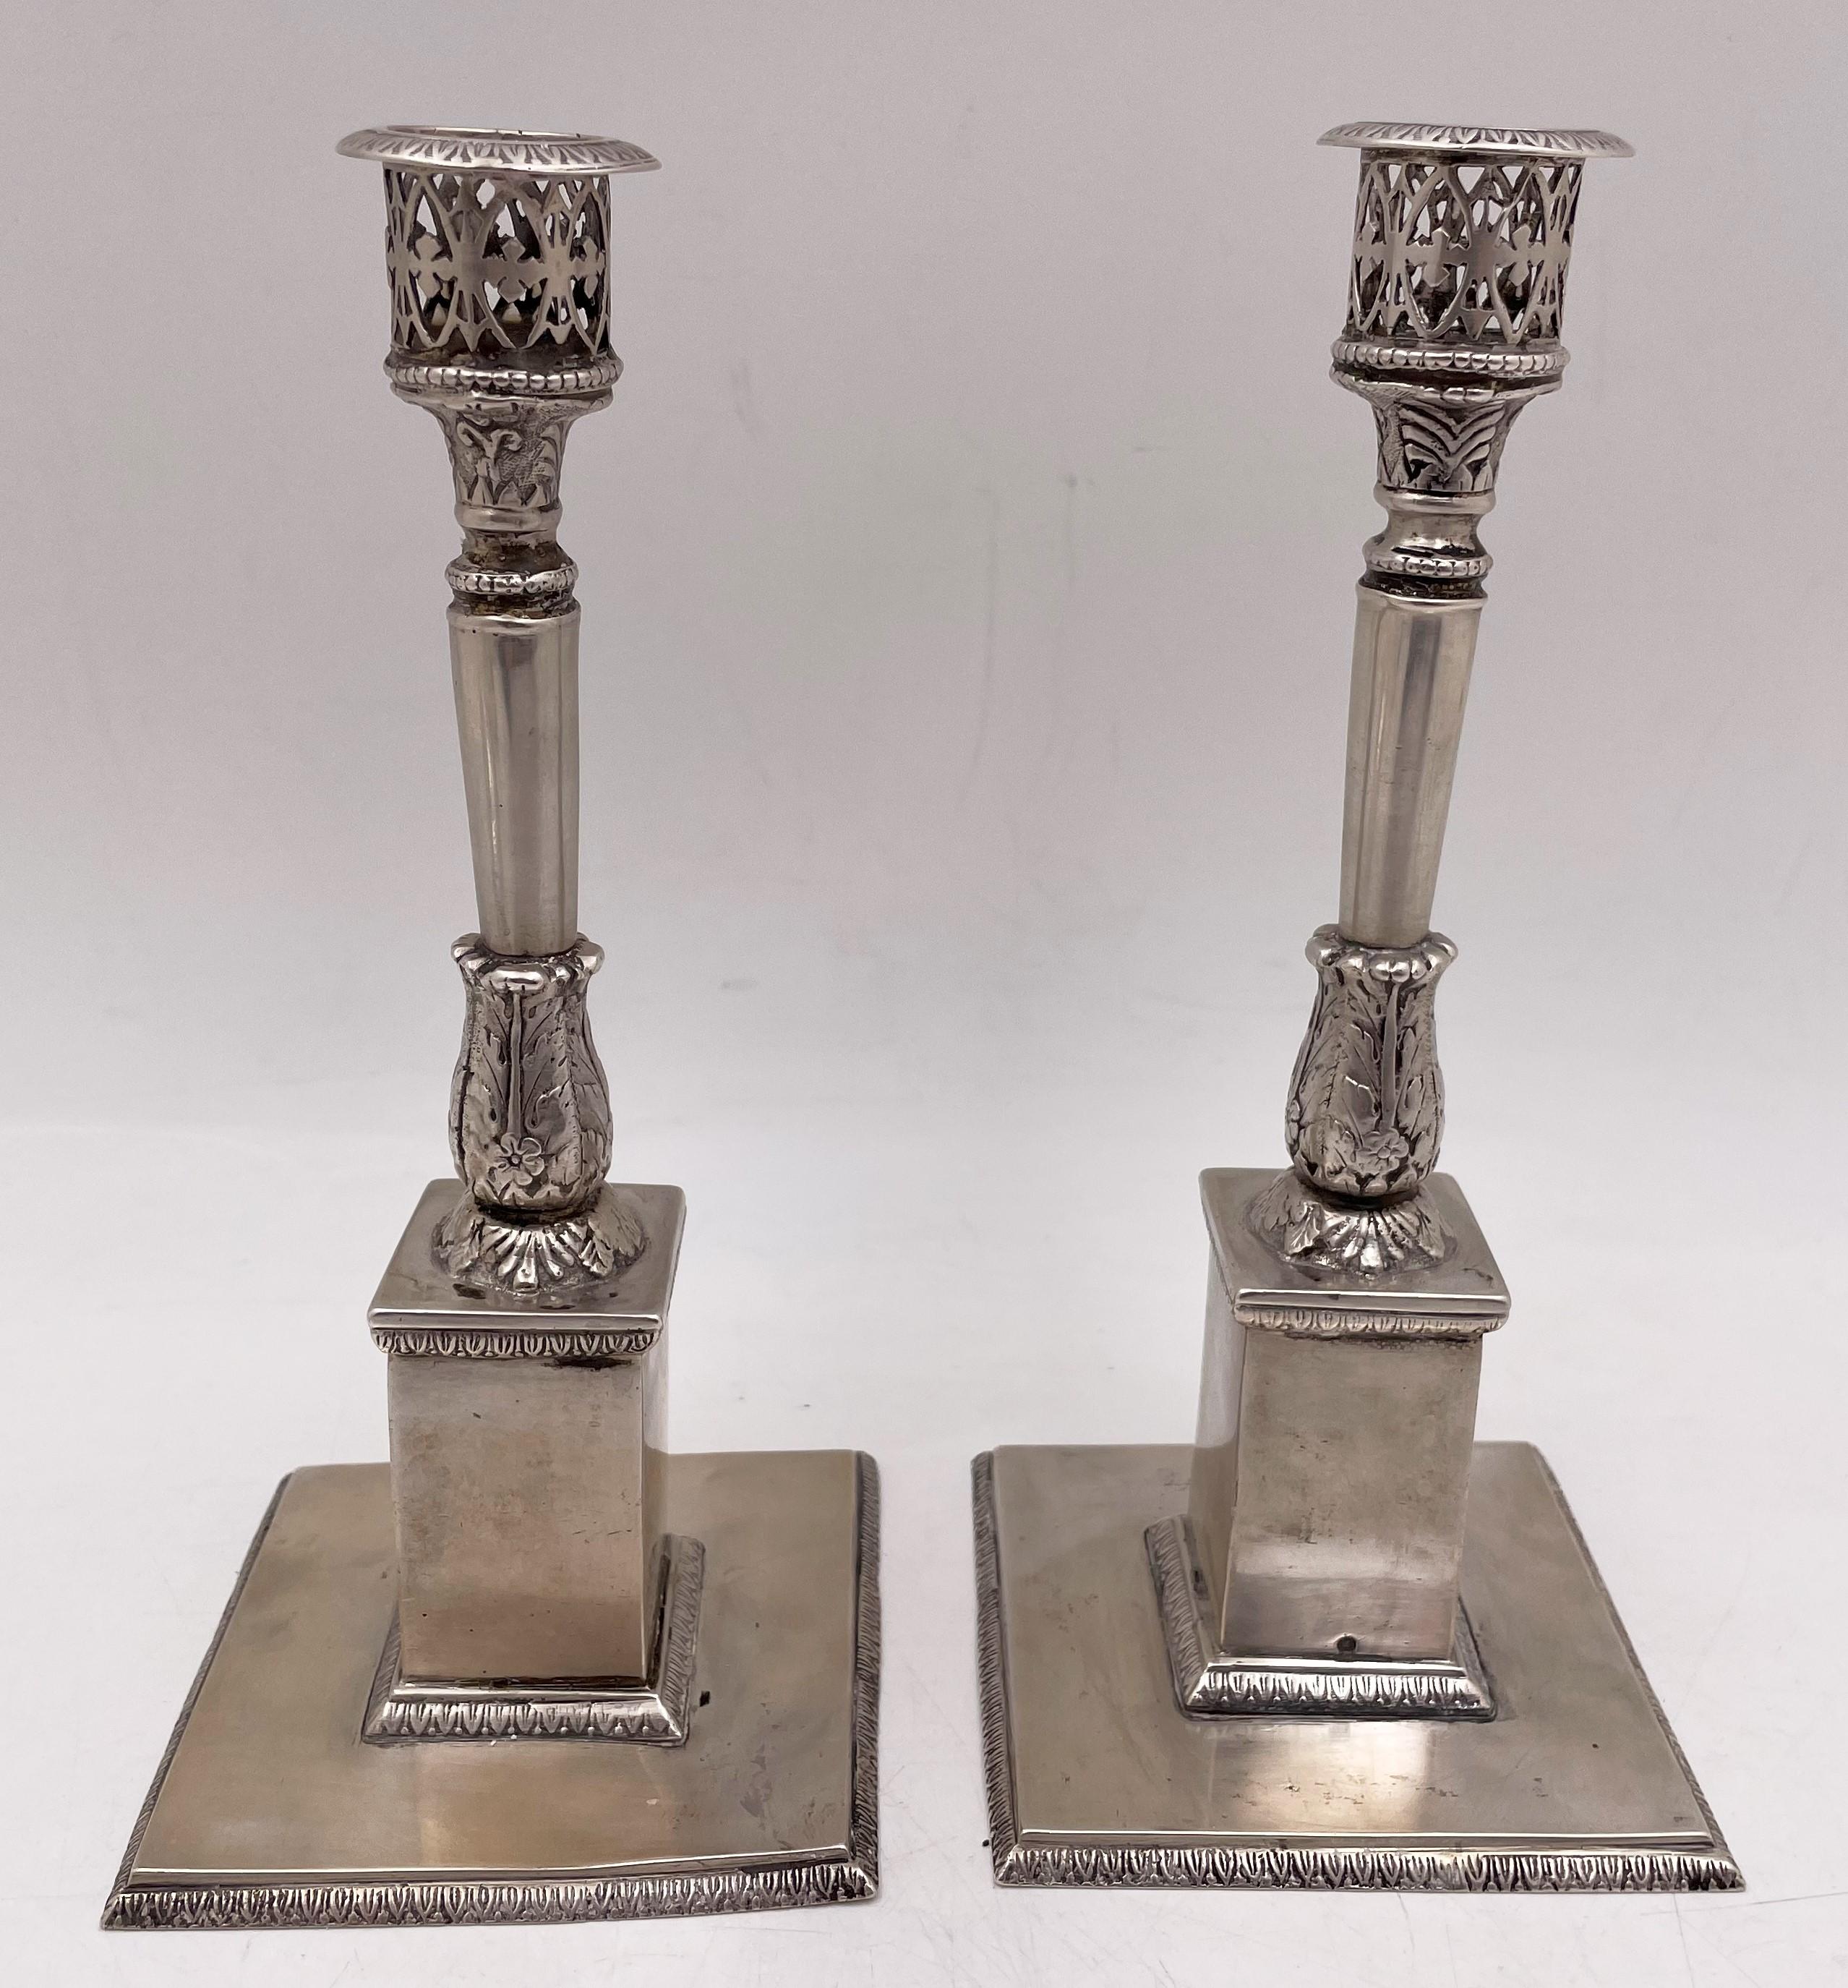 Pair of 18th century silver candlesticks, either Dutch or German, with an elegant design, standing on a square base, with stylized motifs, including palmettes, measuring 8'' in height by 3 5/8'' in depth, and bearing hallmarks as shown. 

Please